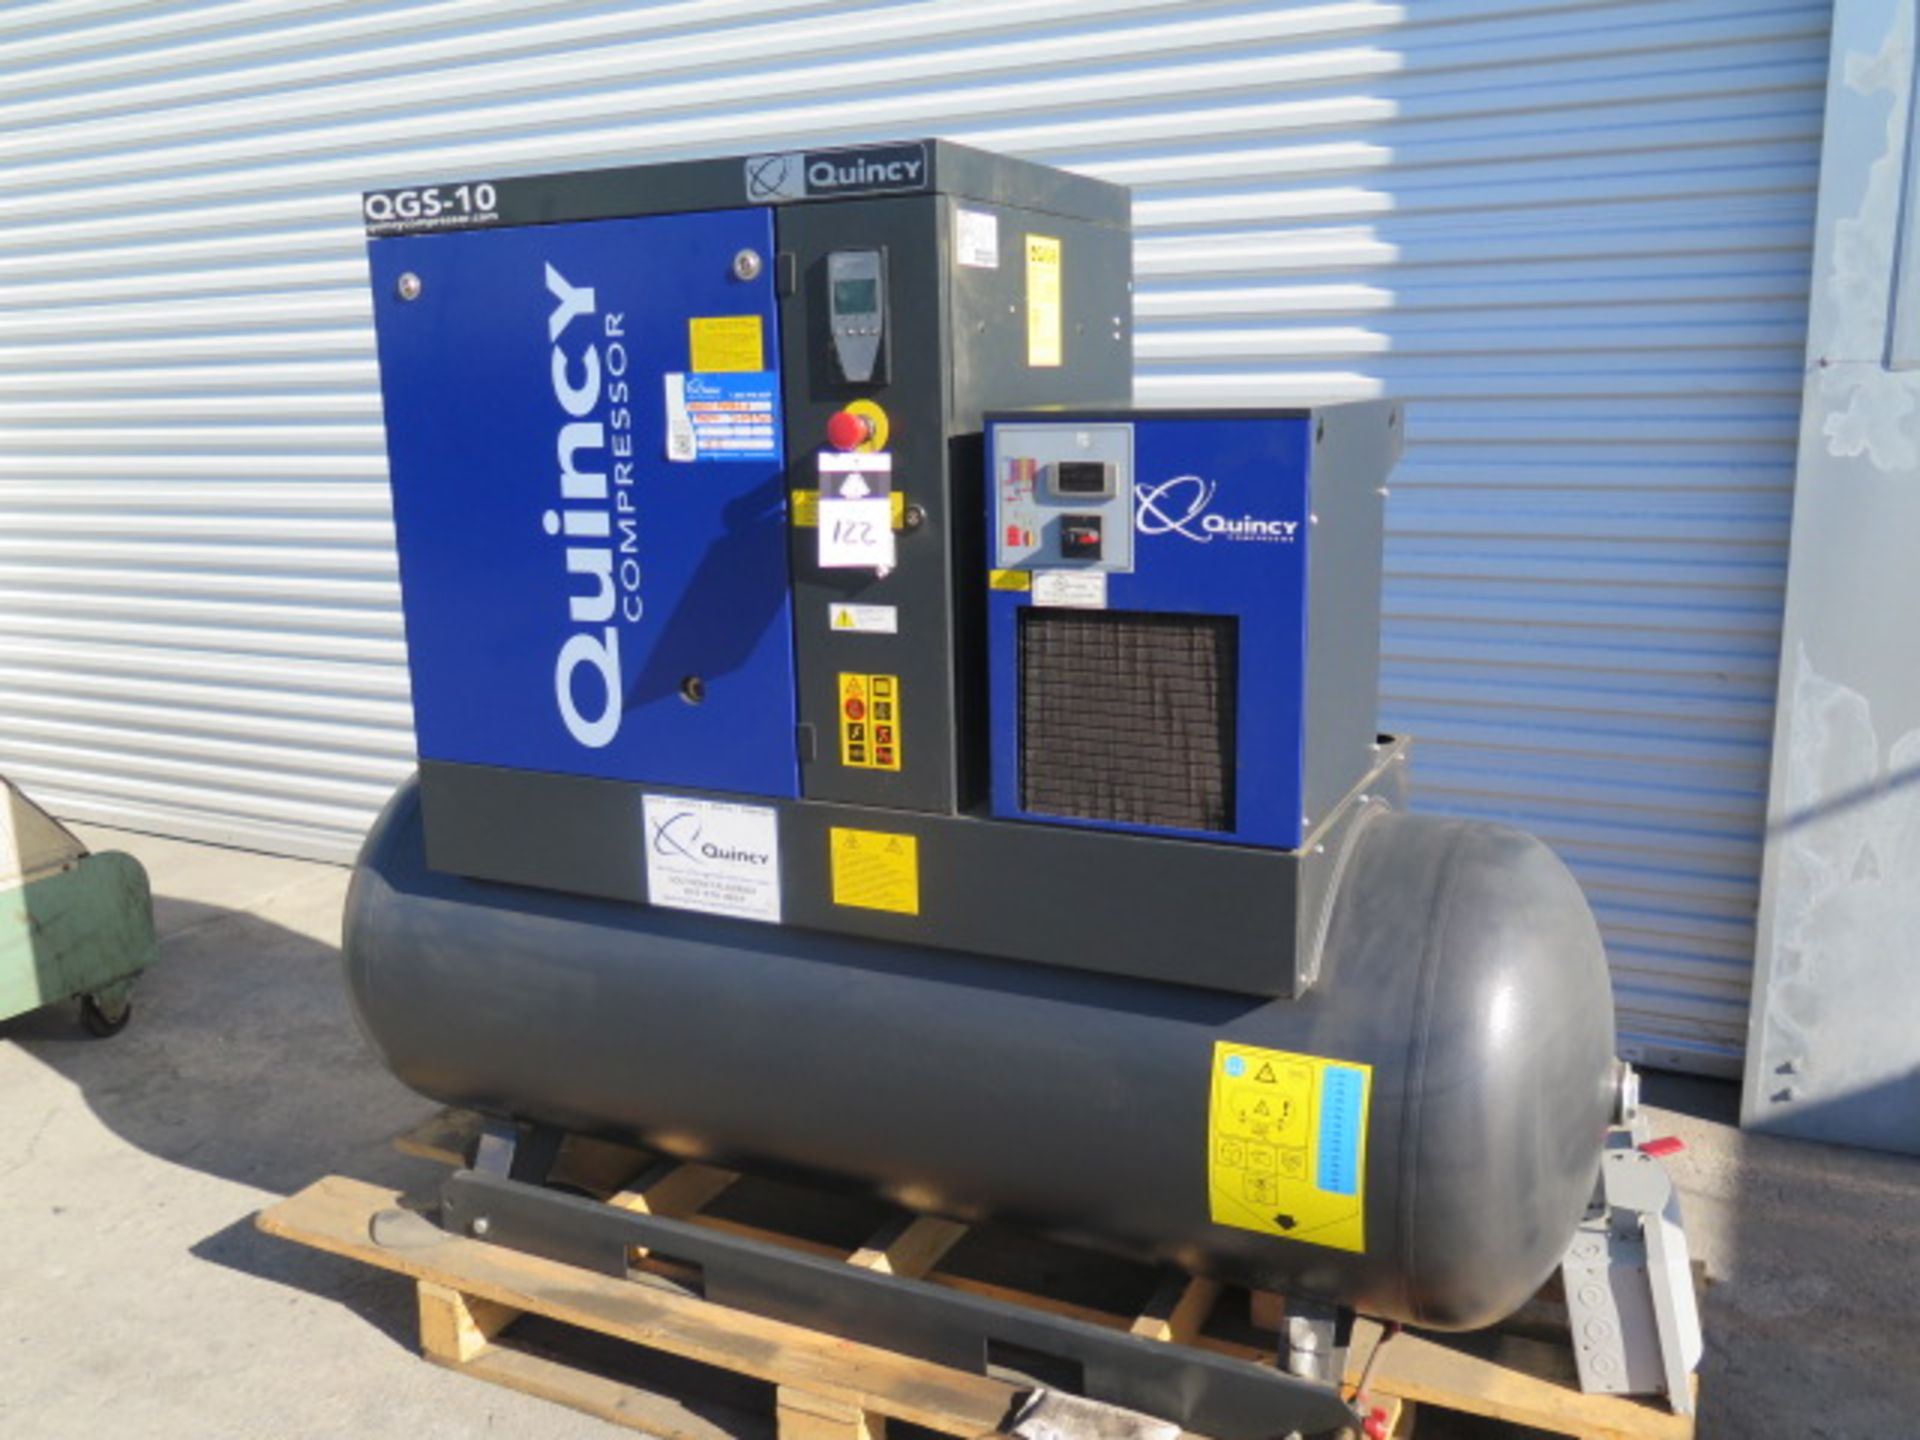 2019 Quincy QGS-10 DT120 10Hp Rotary Air Comp s/n ITJ234684 w/ Dig Controls, Low Hours, SOLD AS IS - Image 2 of 9